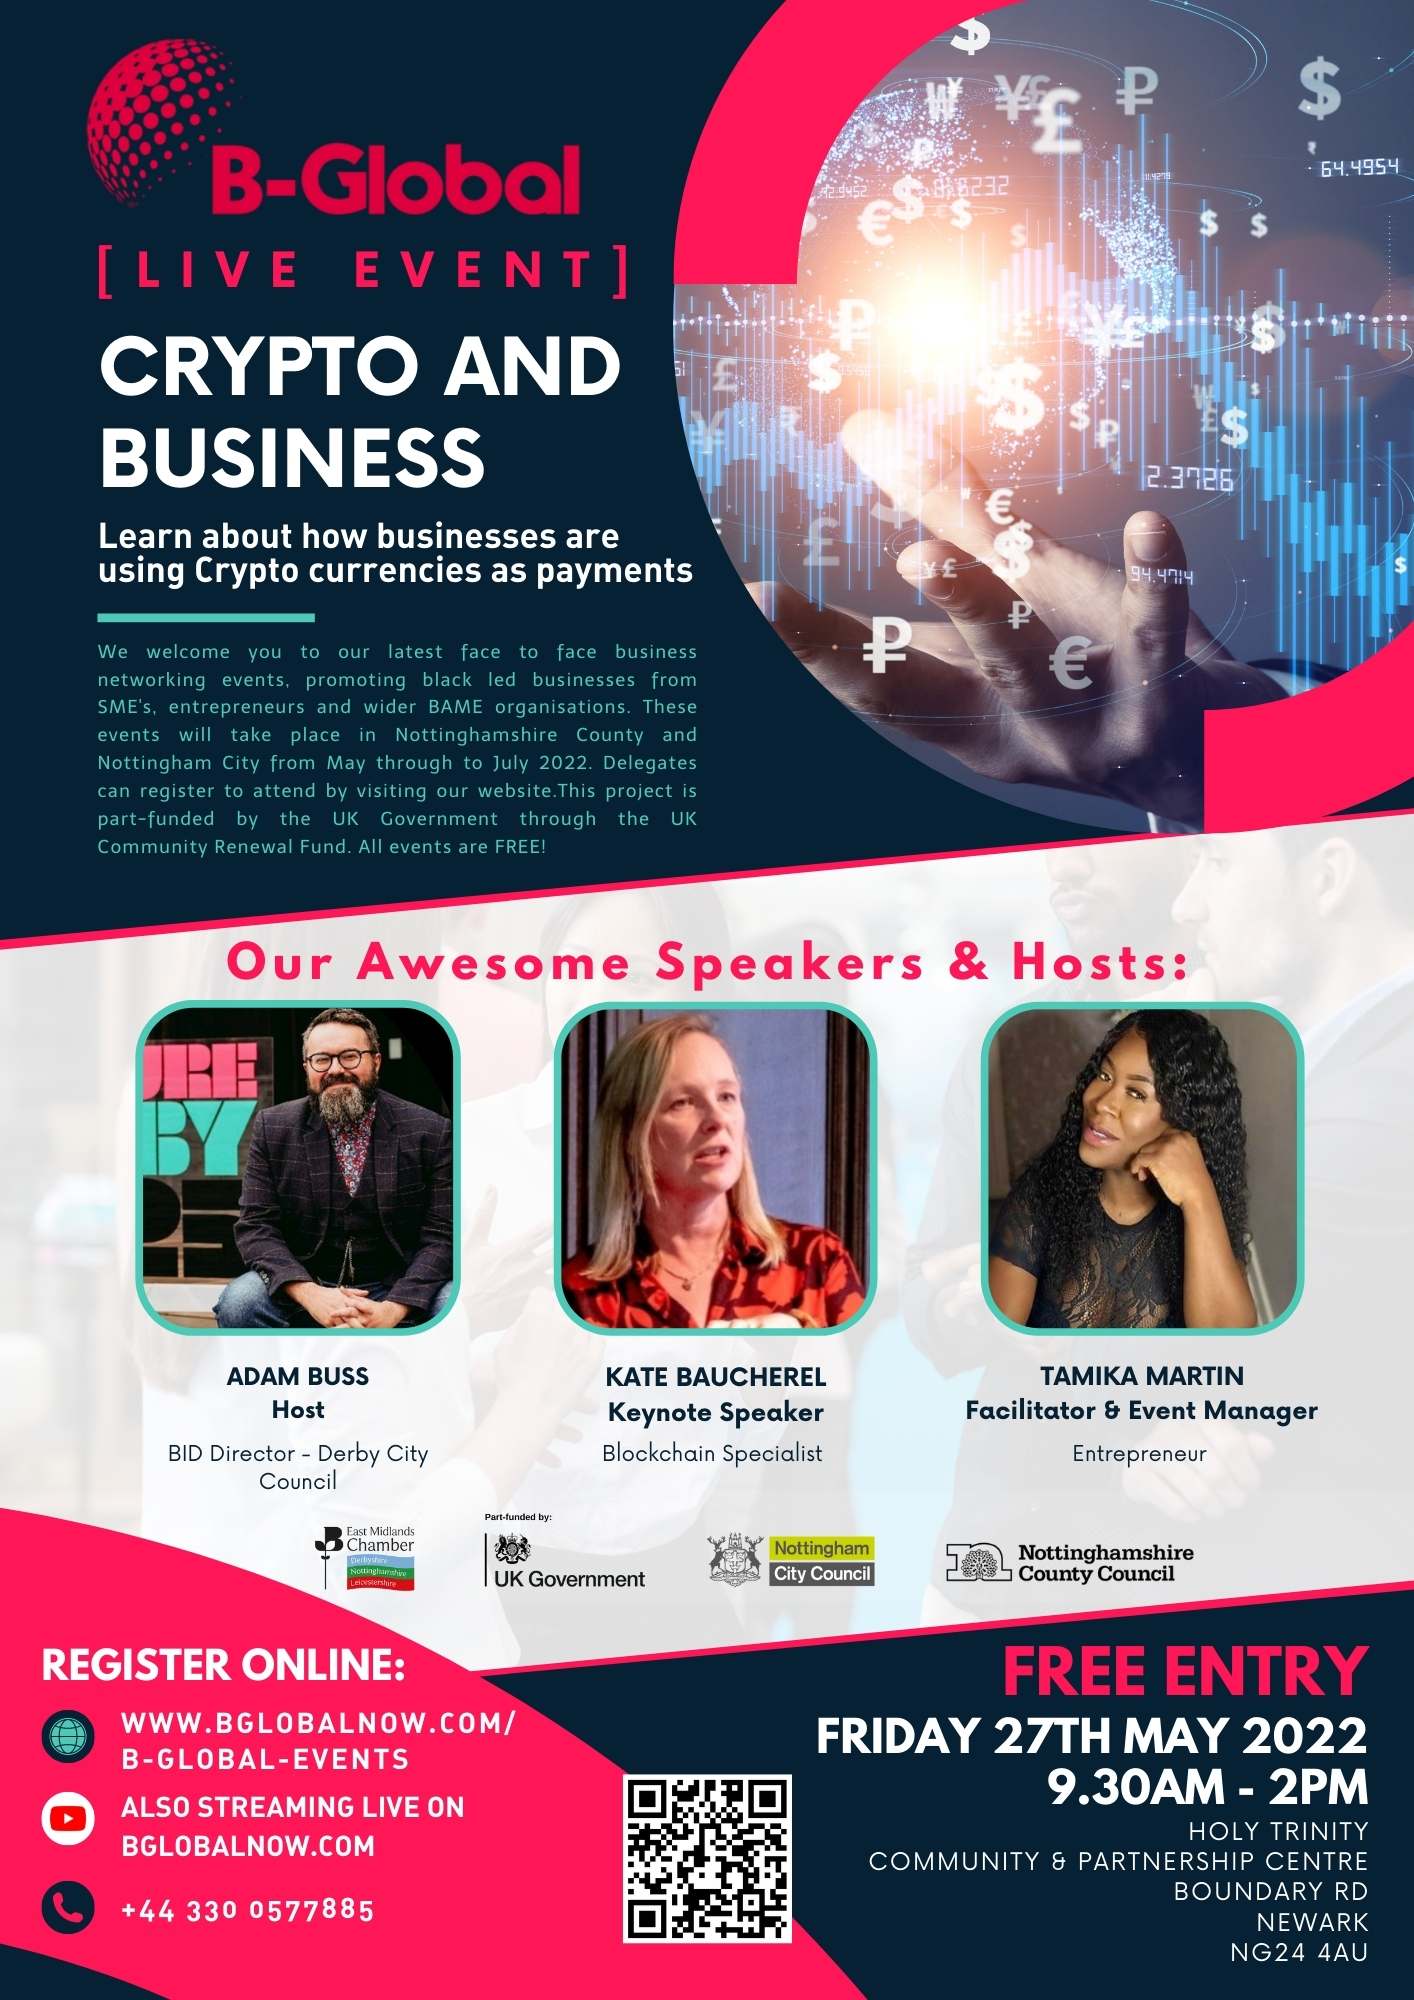 LIVESTREAM EVENT - B-Global - Kate Baucheral - CRYPTO AND BUSINESS B-Global